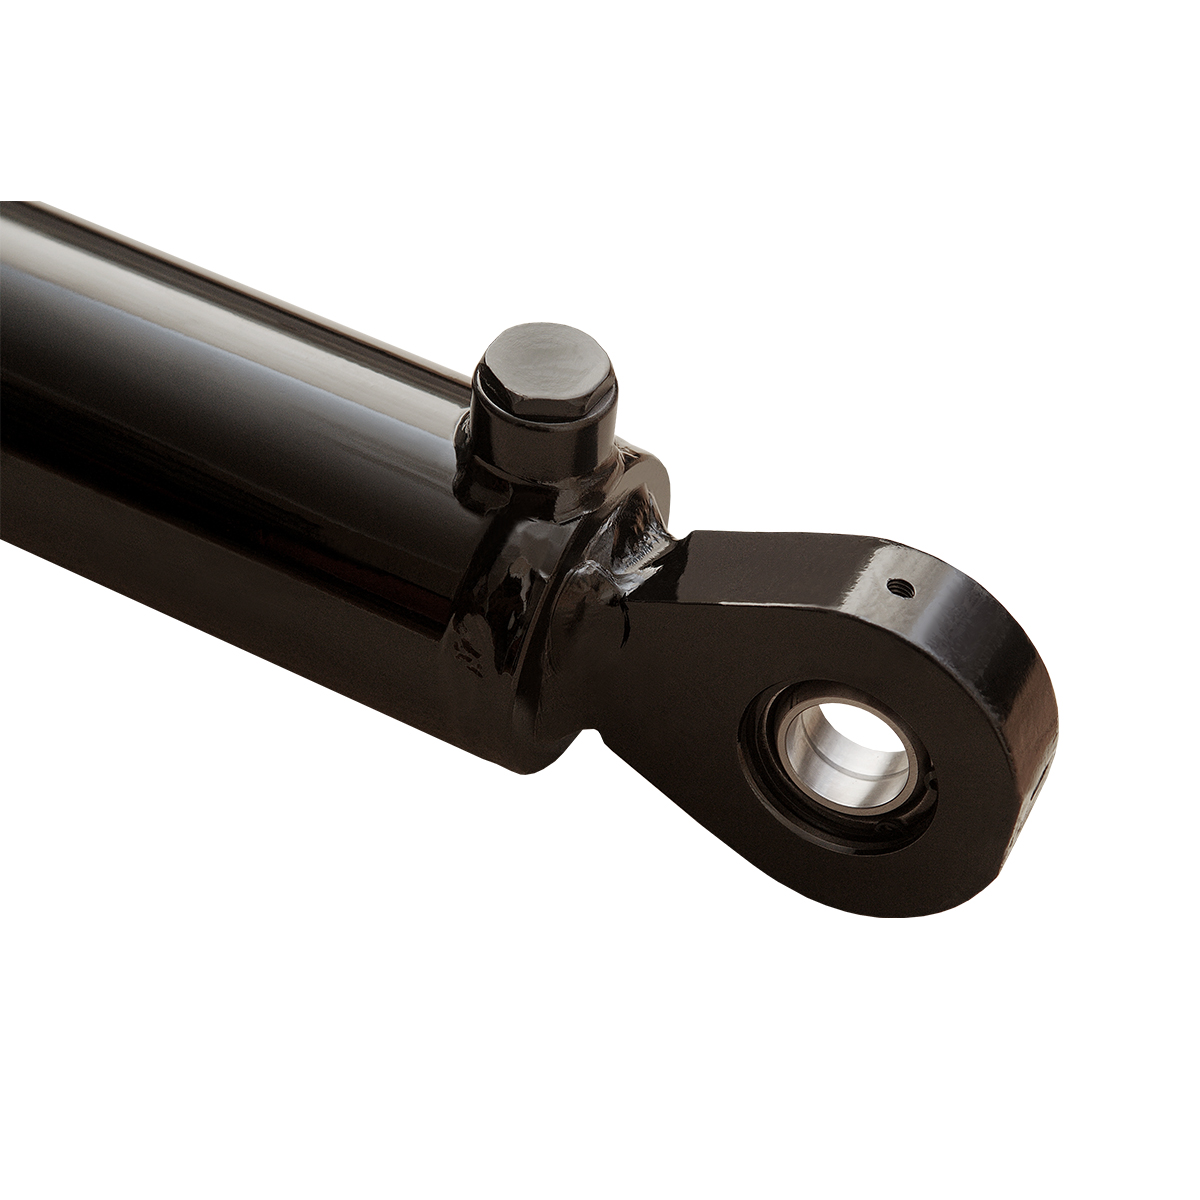 2.5 bore x 16 stroke hydraulic cylinder, welded swivel eye double acting cylinder | Magister Hydraulics